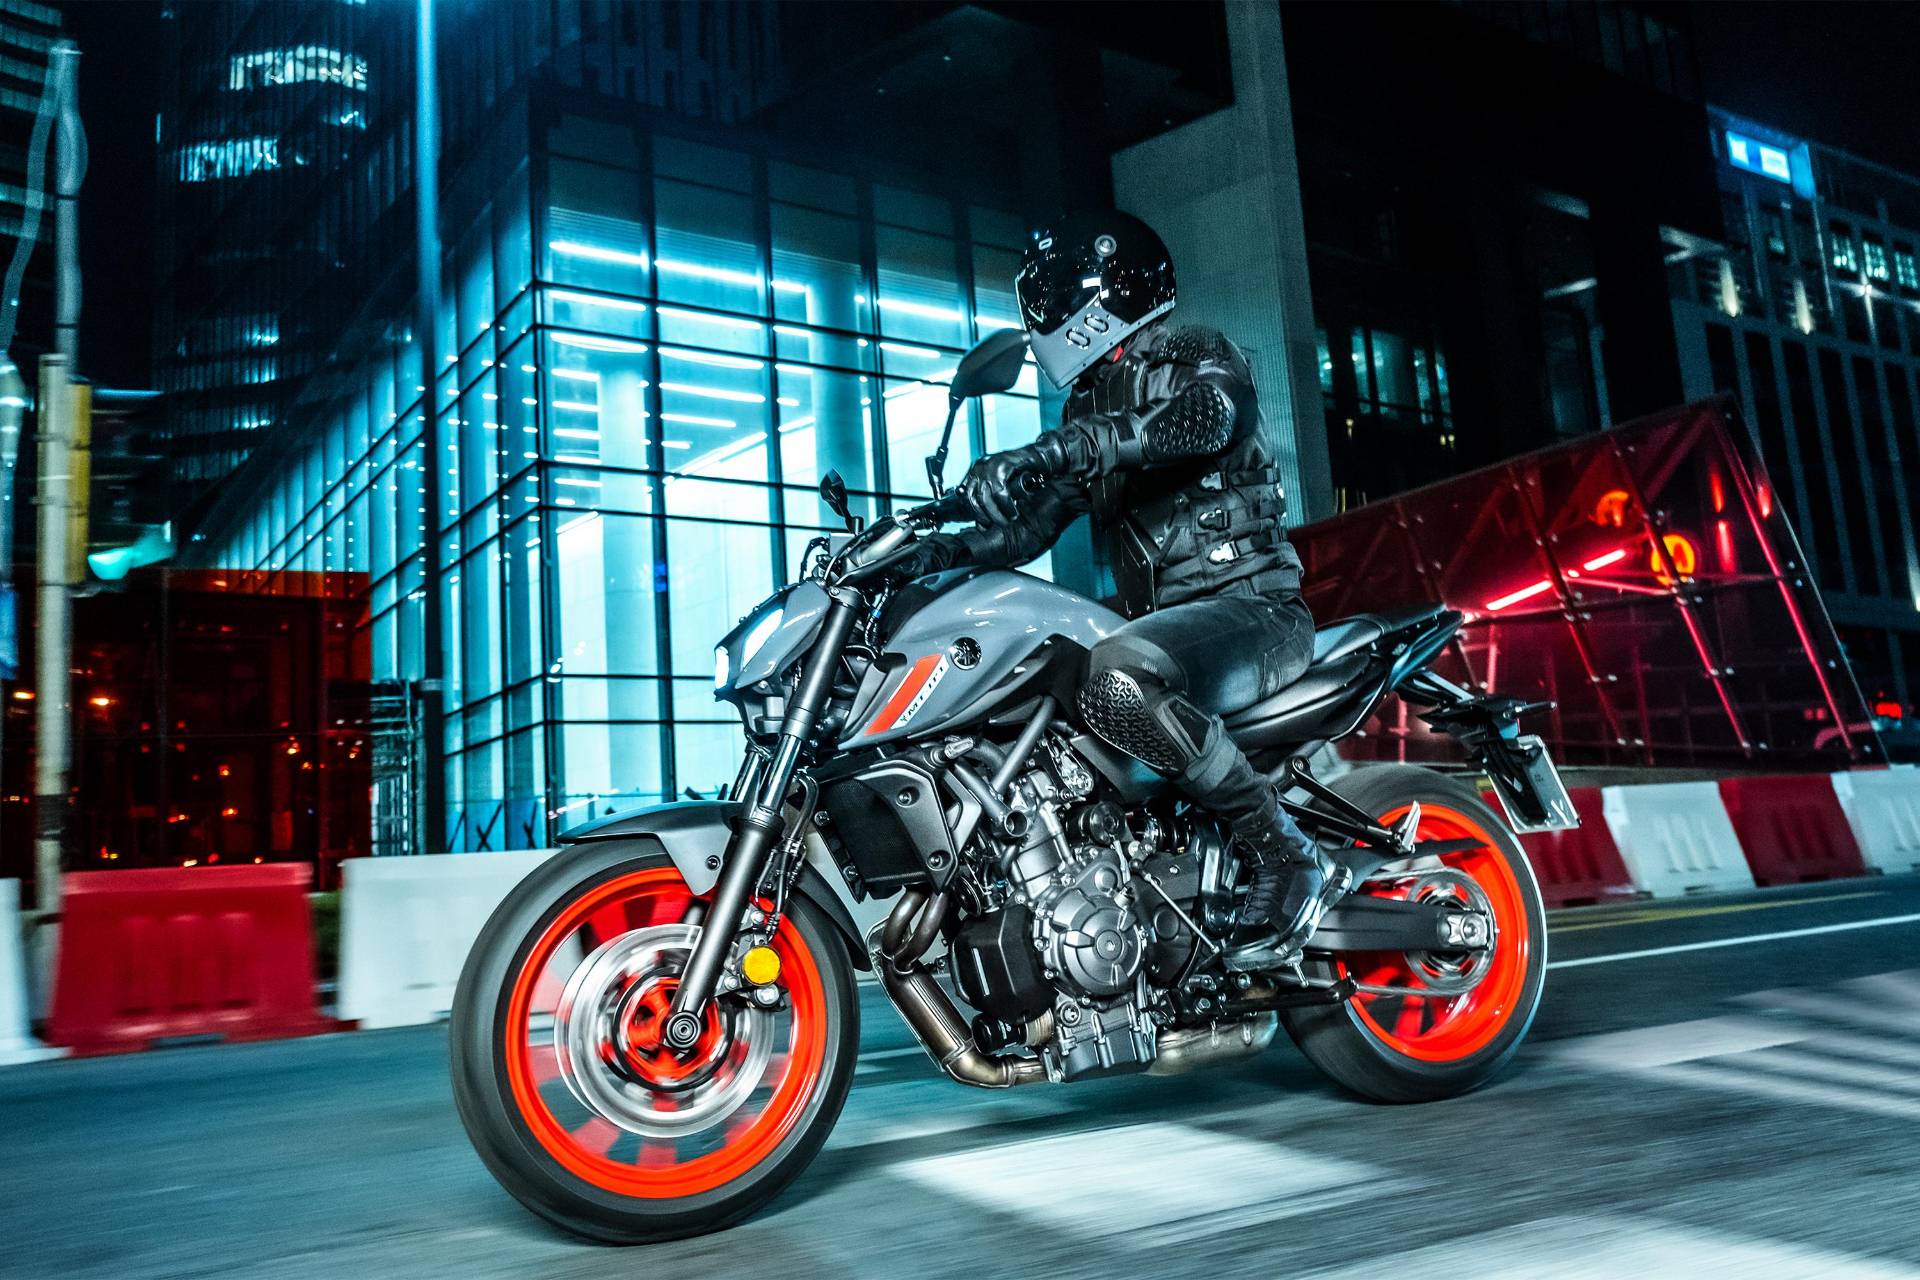 New 2021 Yamaha MT-07 Motorcycles in Clearwater, FL 